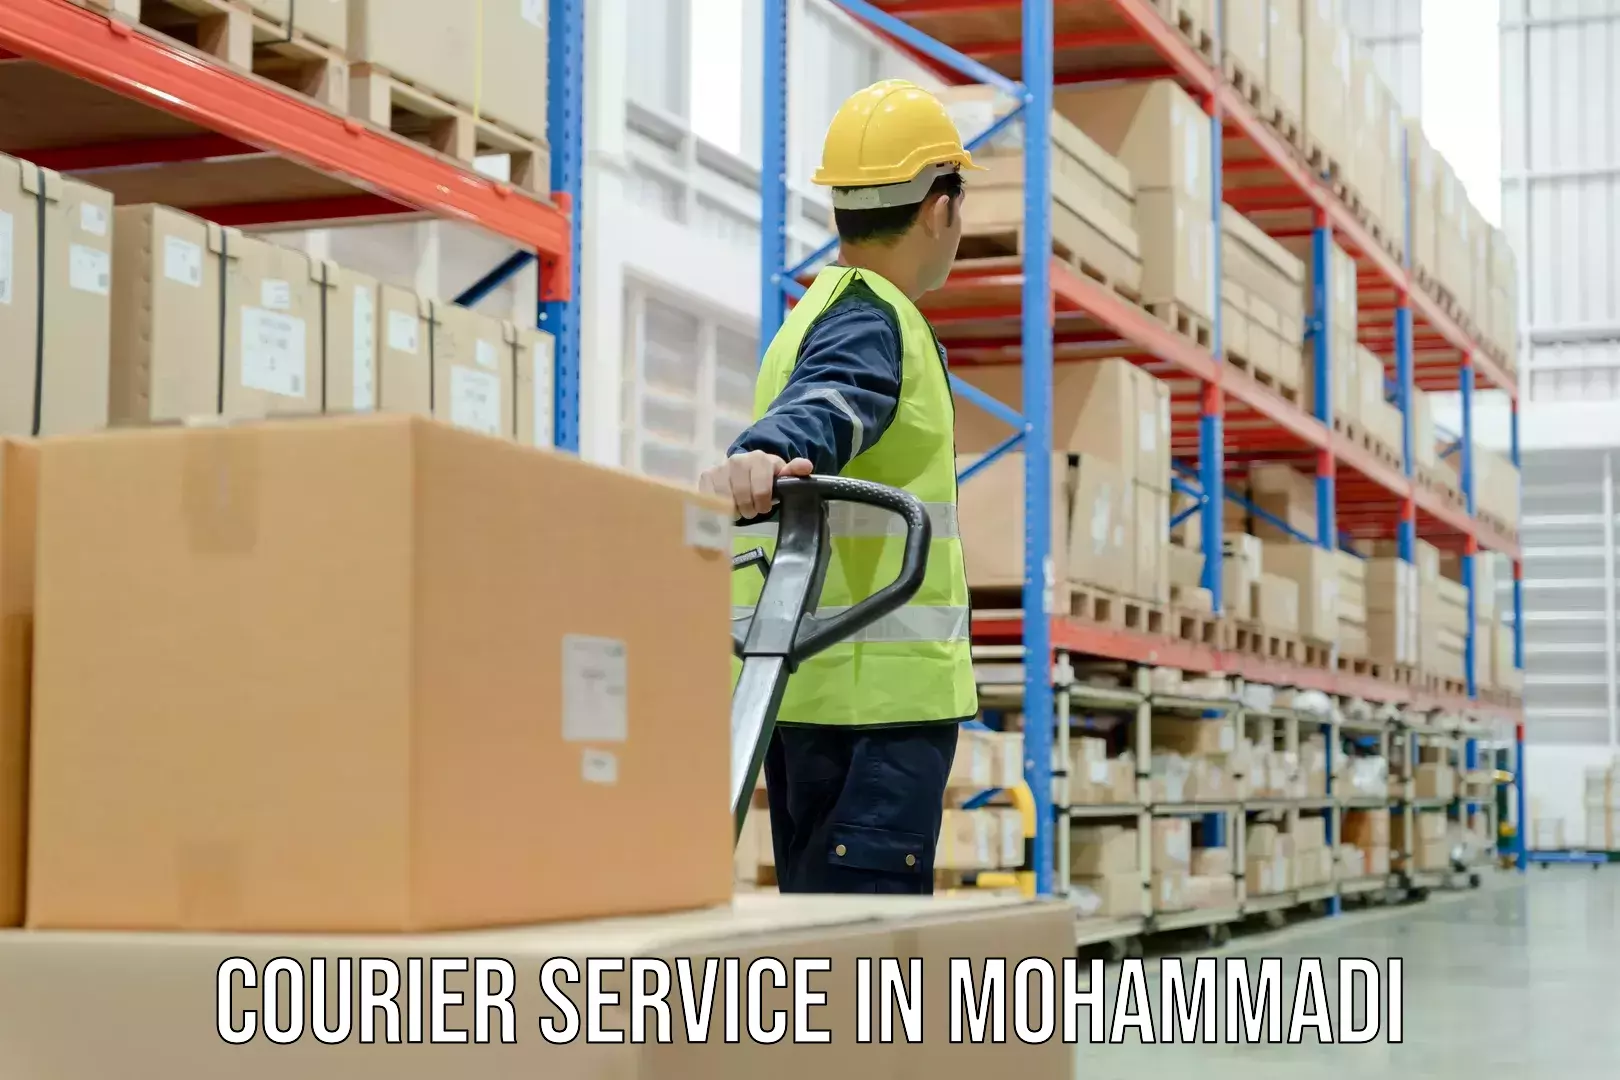 Custom courier packages in Mohammadi